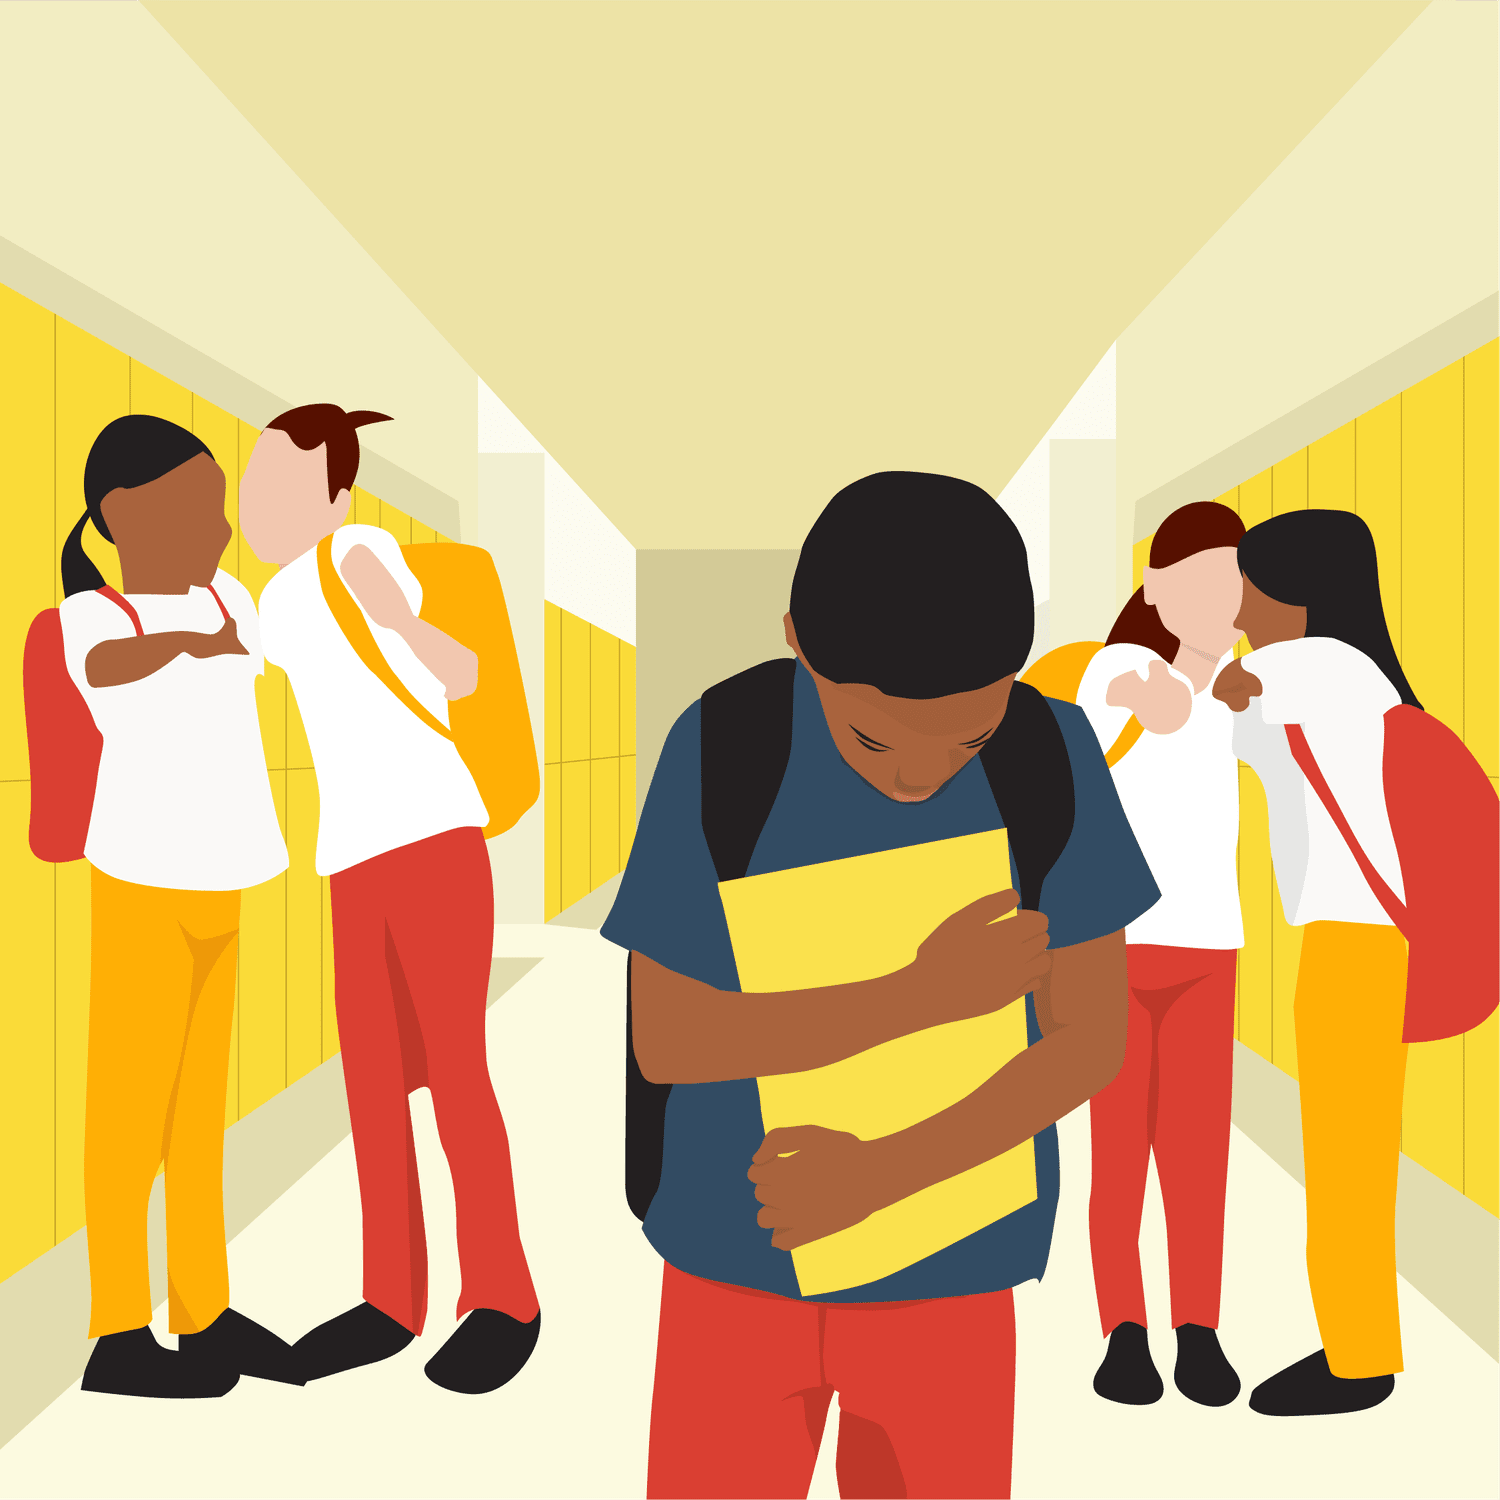 How to Deal With Bullies: A Guide for Parents